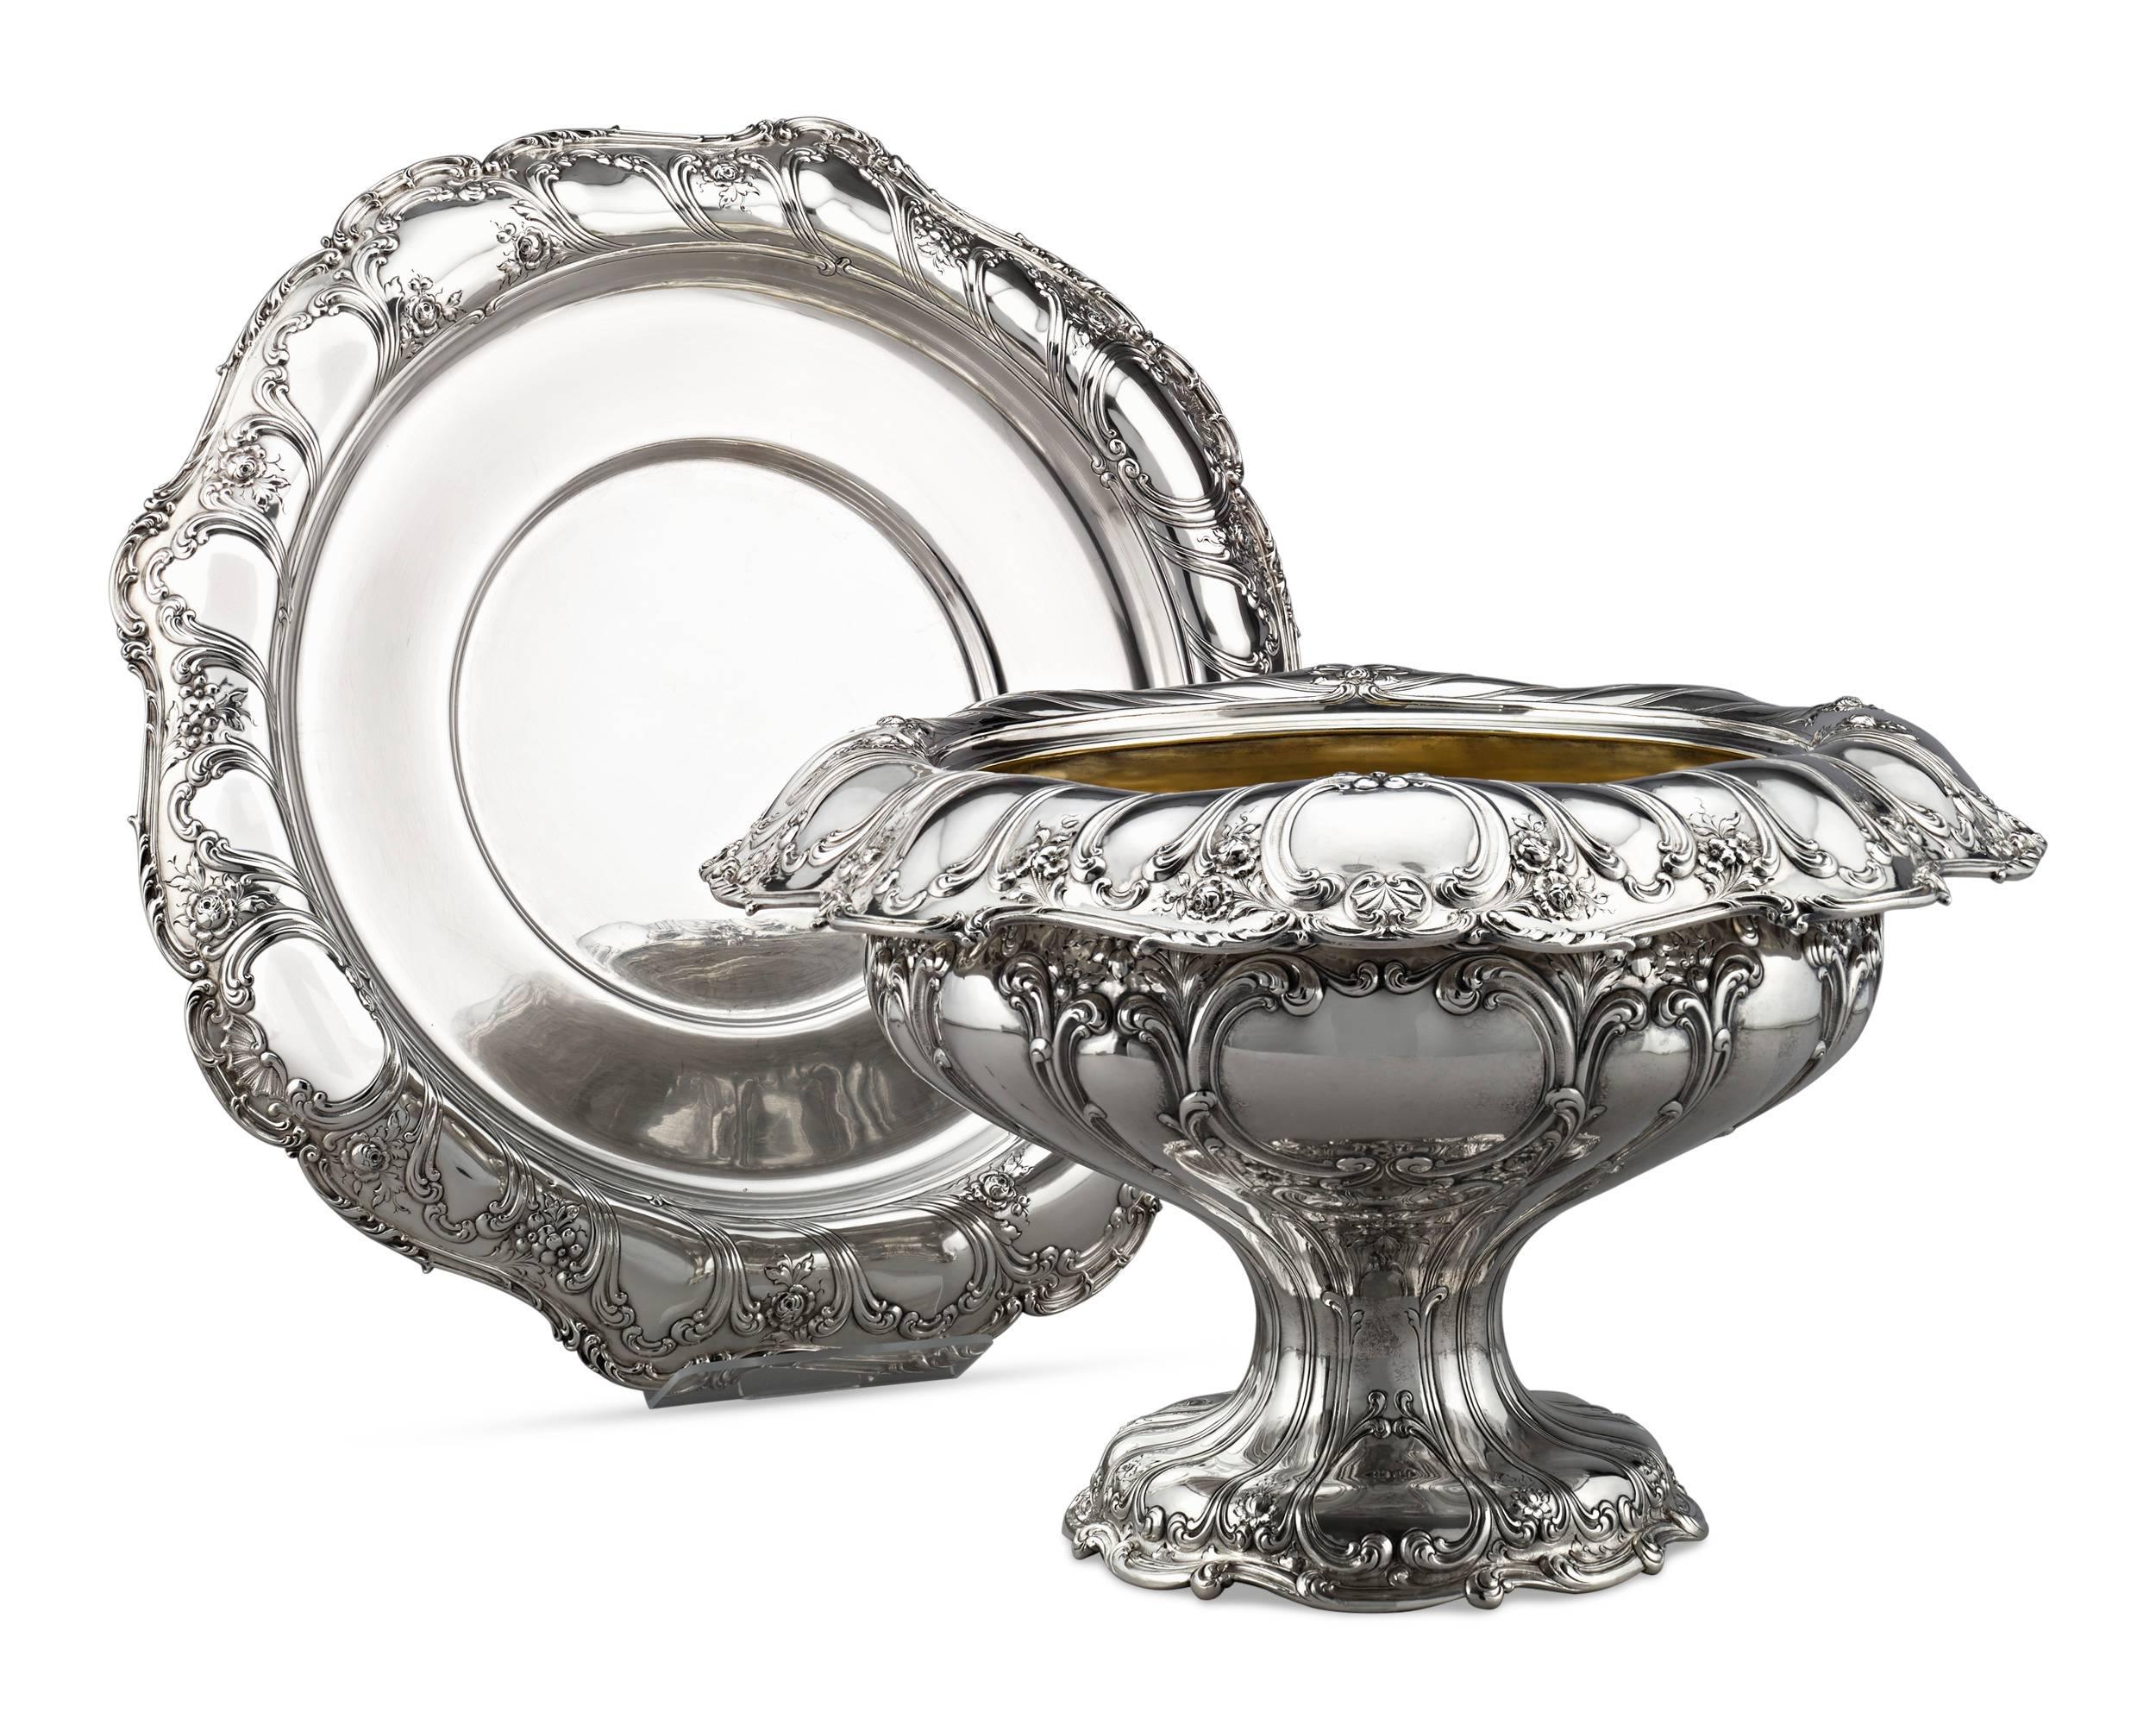 Detailed in an intricate repoussé and chased floral, scroll and shell motif is this exqusite silver punch bowl and under plate by the highly respected American silver smithing firm of Gorham. The Rhode Island firm is renowned for the high-caliber of